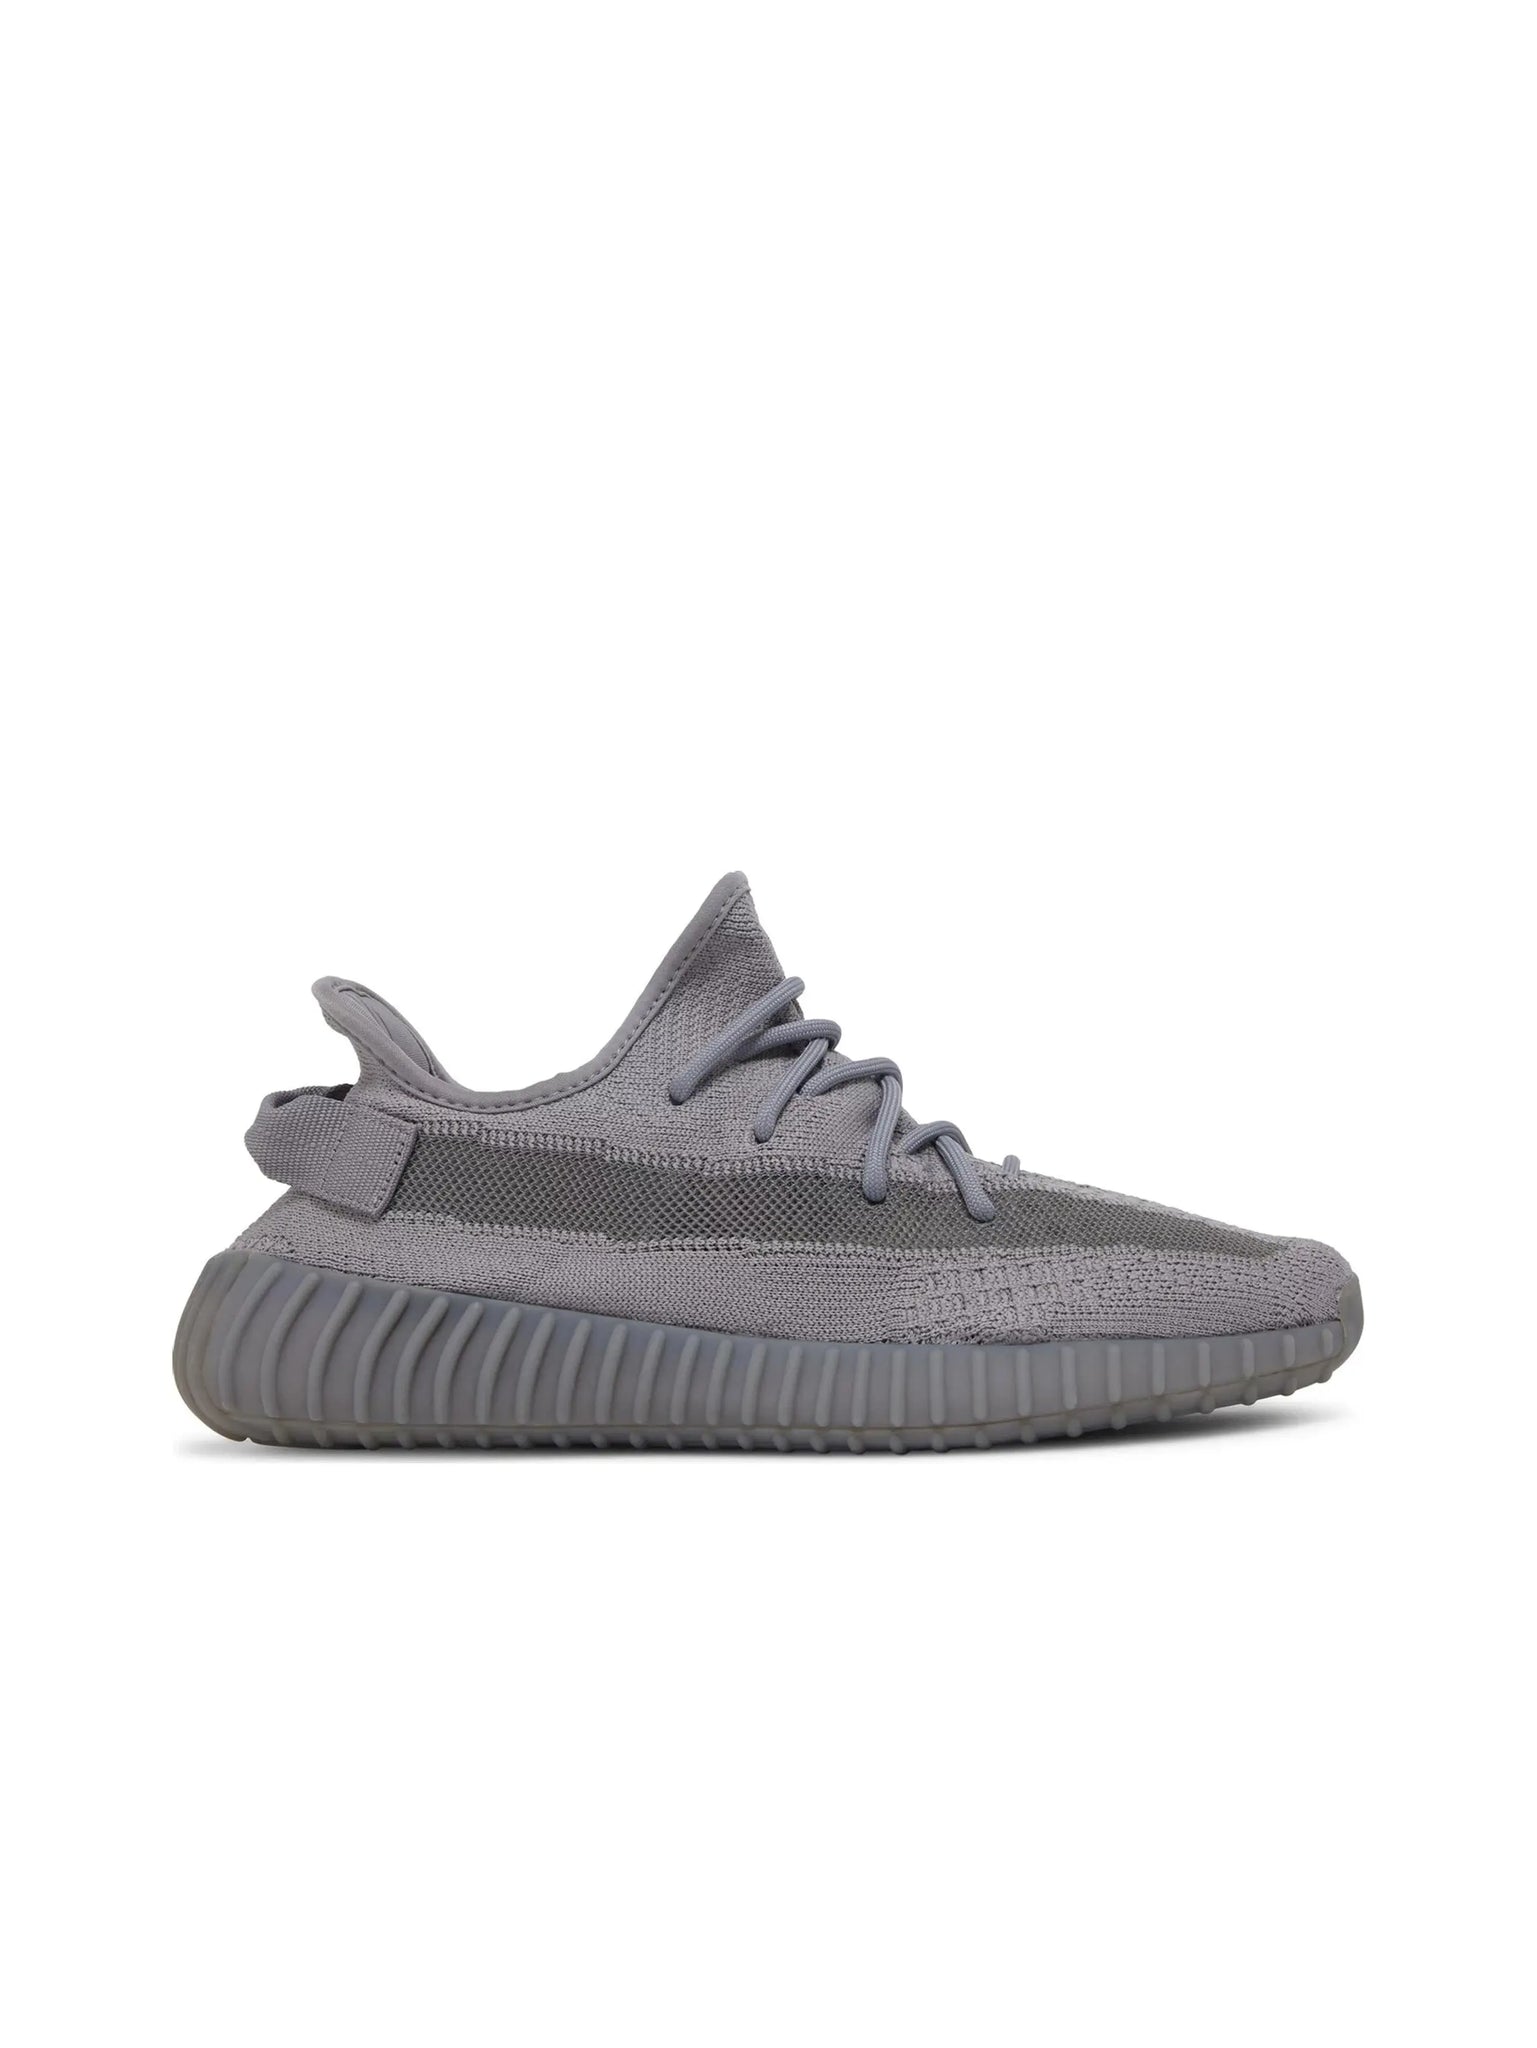 Adidas Yeezy Boost 350 V2 Steel Grey in Auckland, New Zealand - Shop name